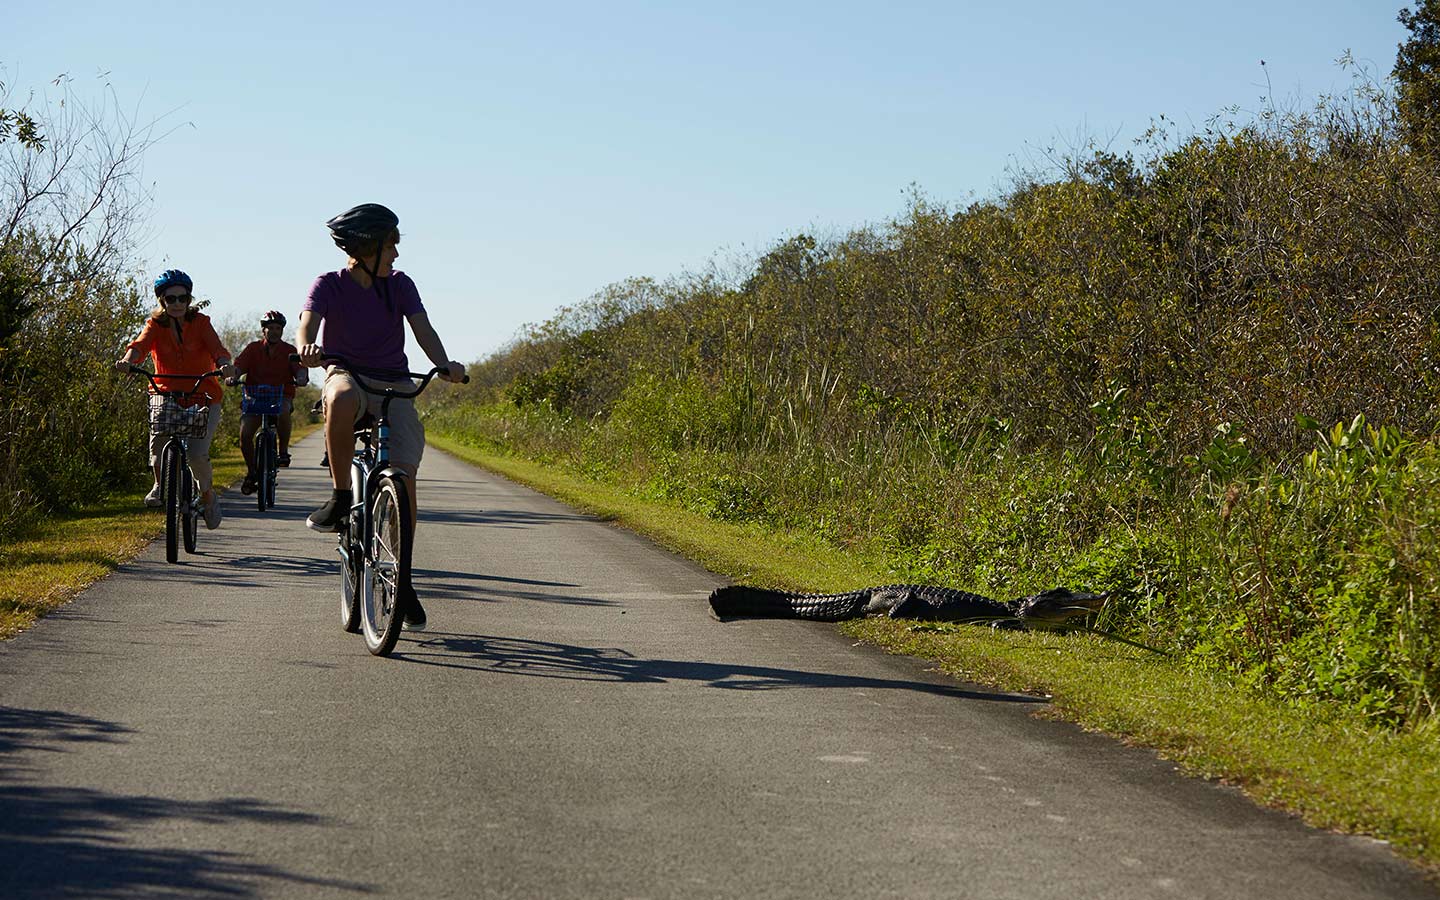 Bike riding through the Everglades is an exciting way to encounter an alligator